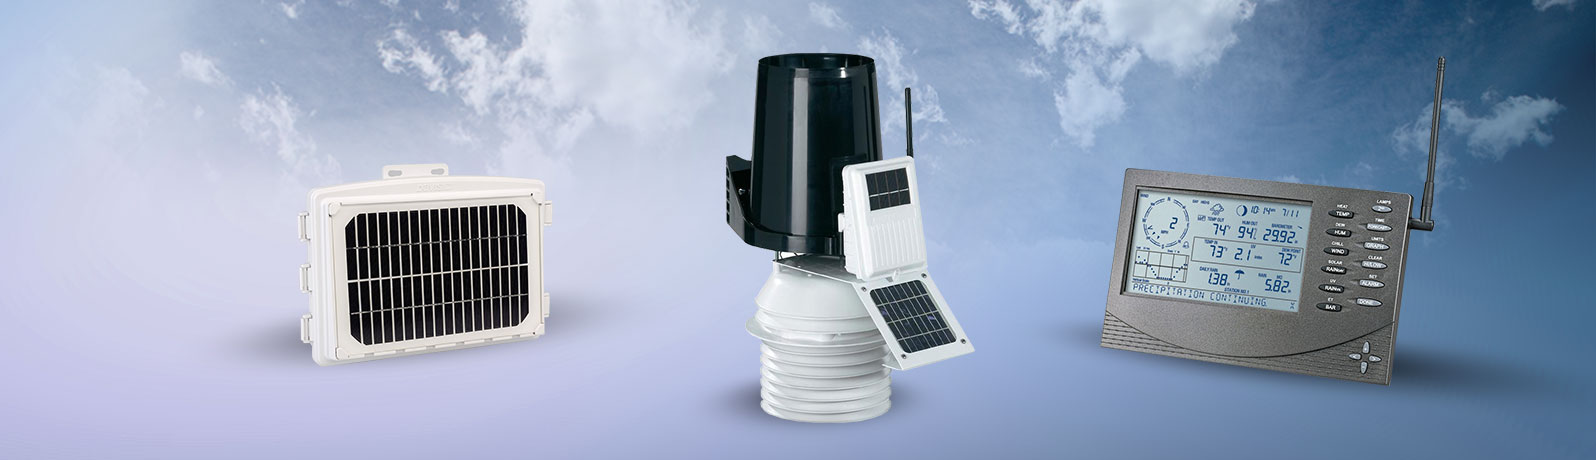 weather-stations